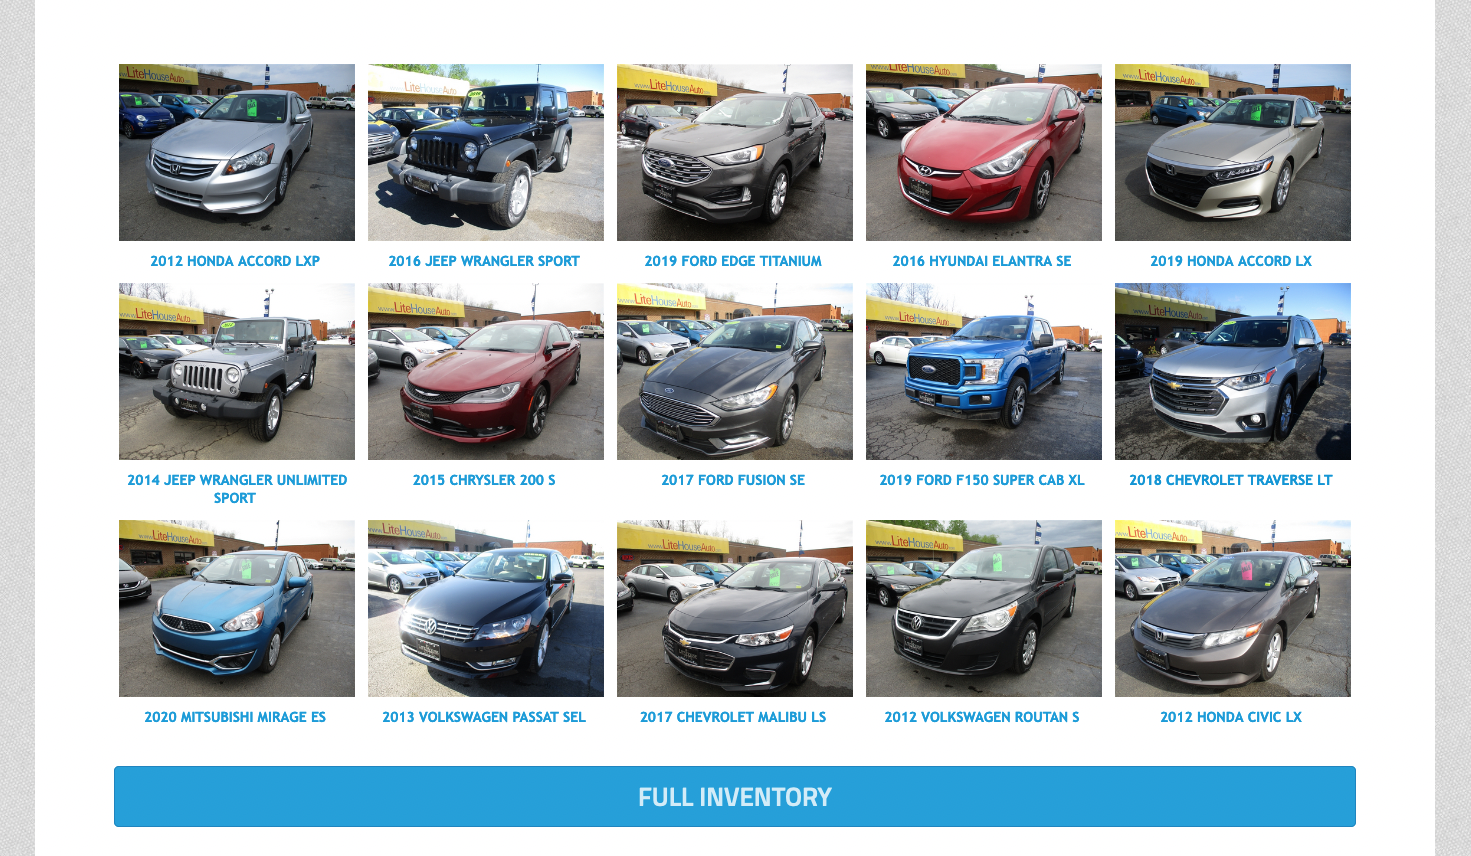 This is an inventory grid showing featured image thumbnails and post titles. A full inventory link takes users to the vehicle post archive.